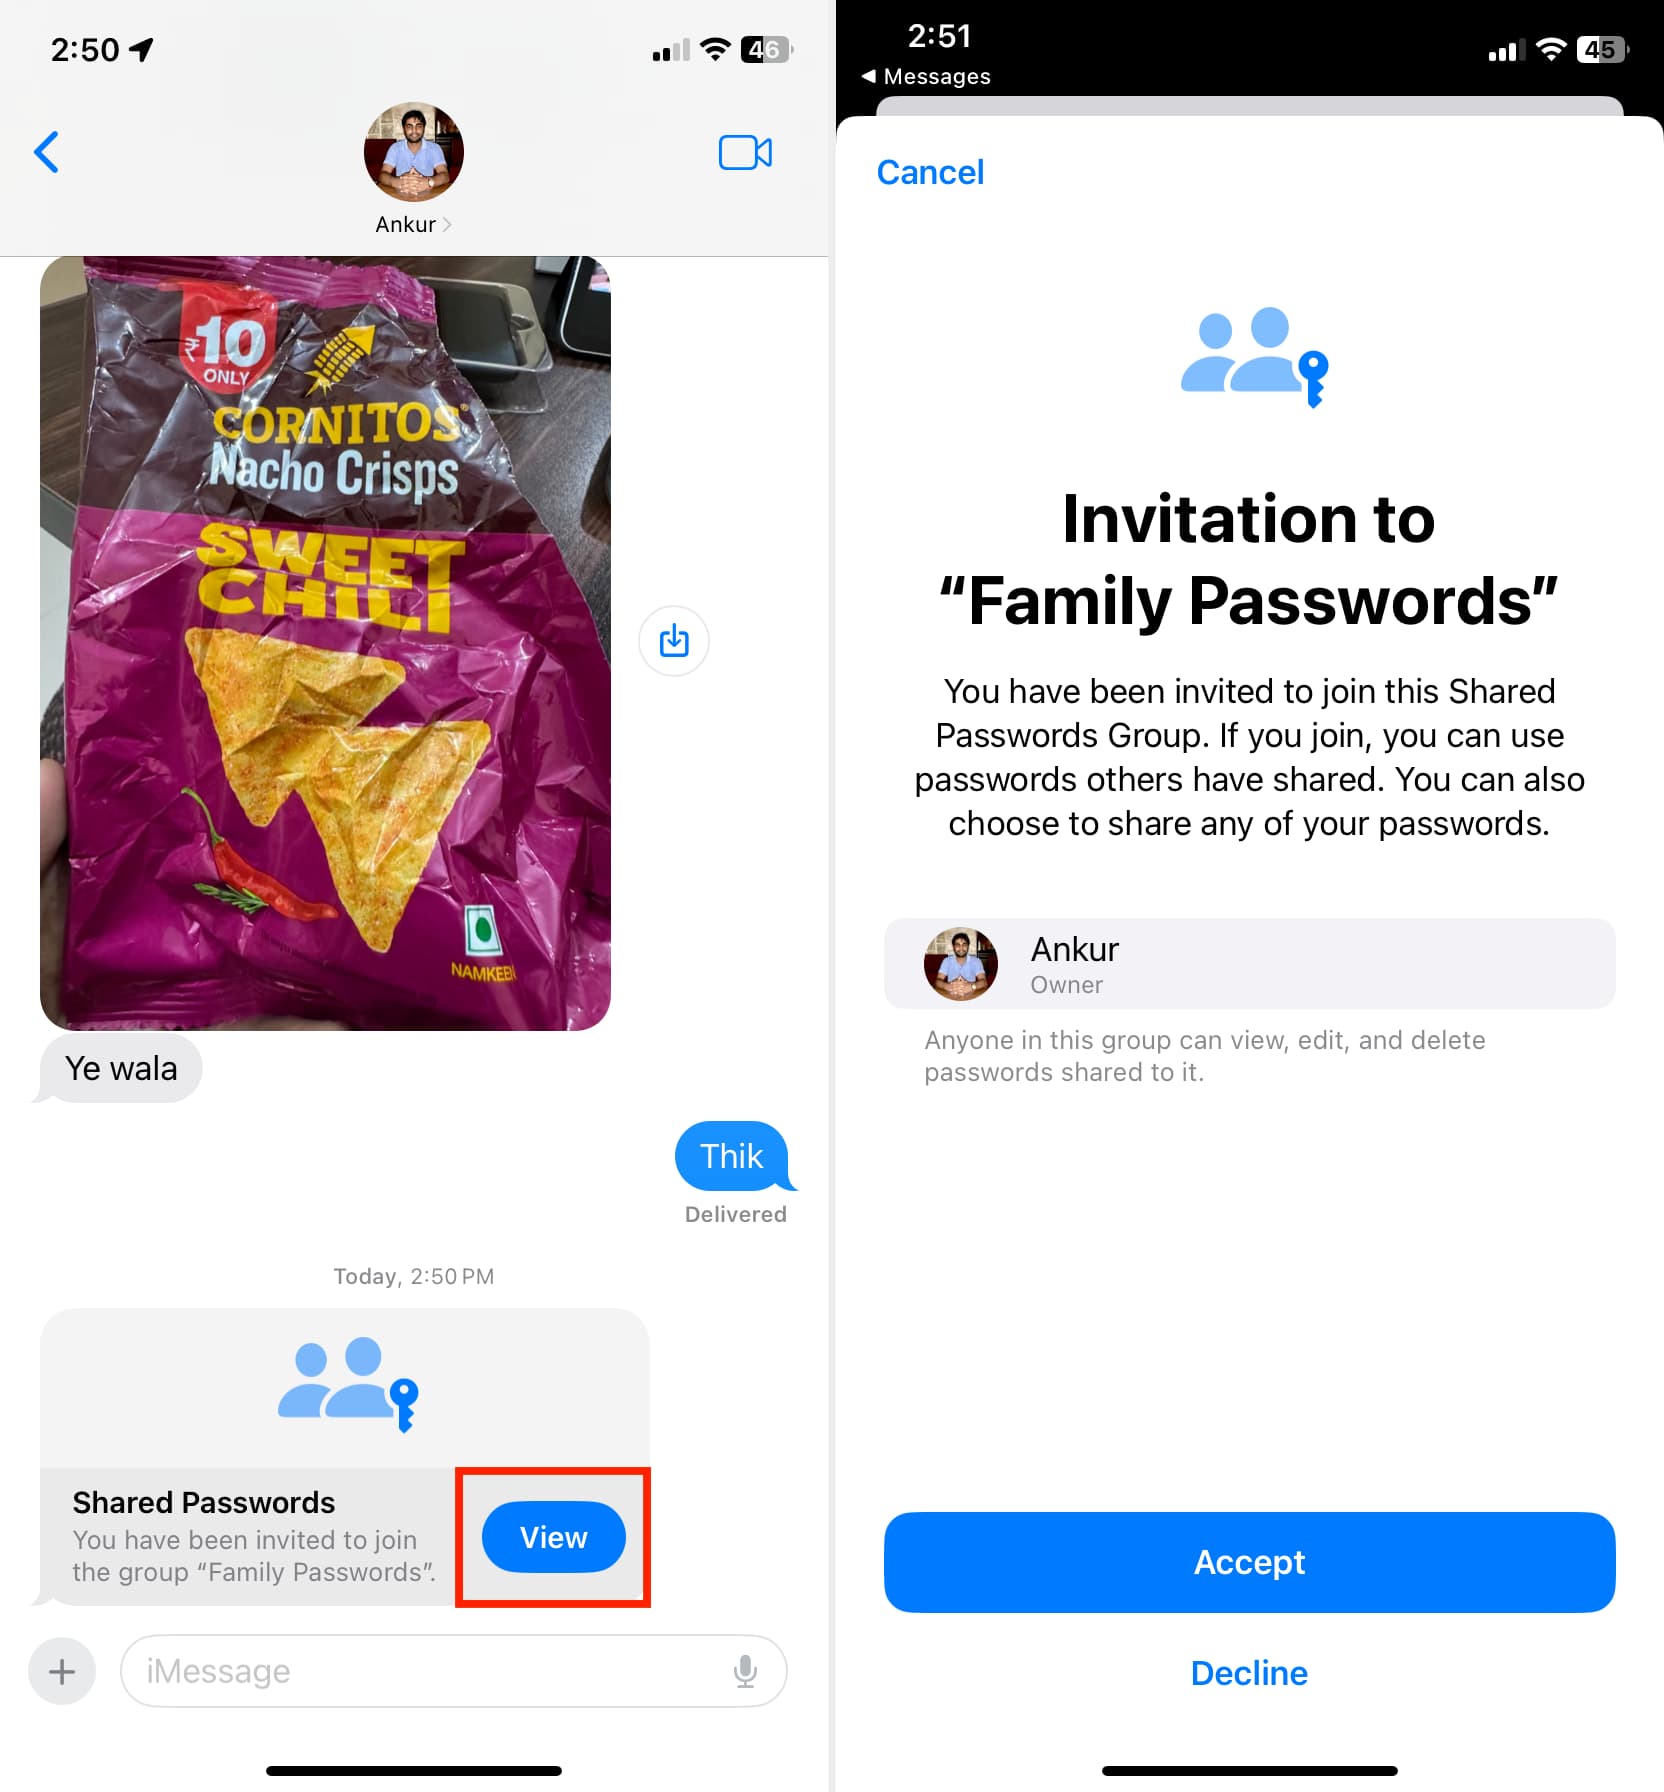 Accept invitation to join Shared Passwords Group